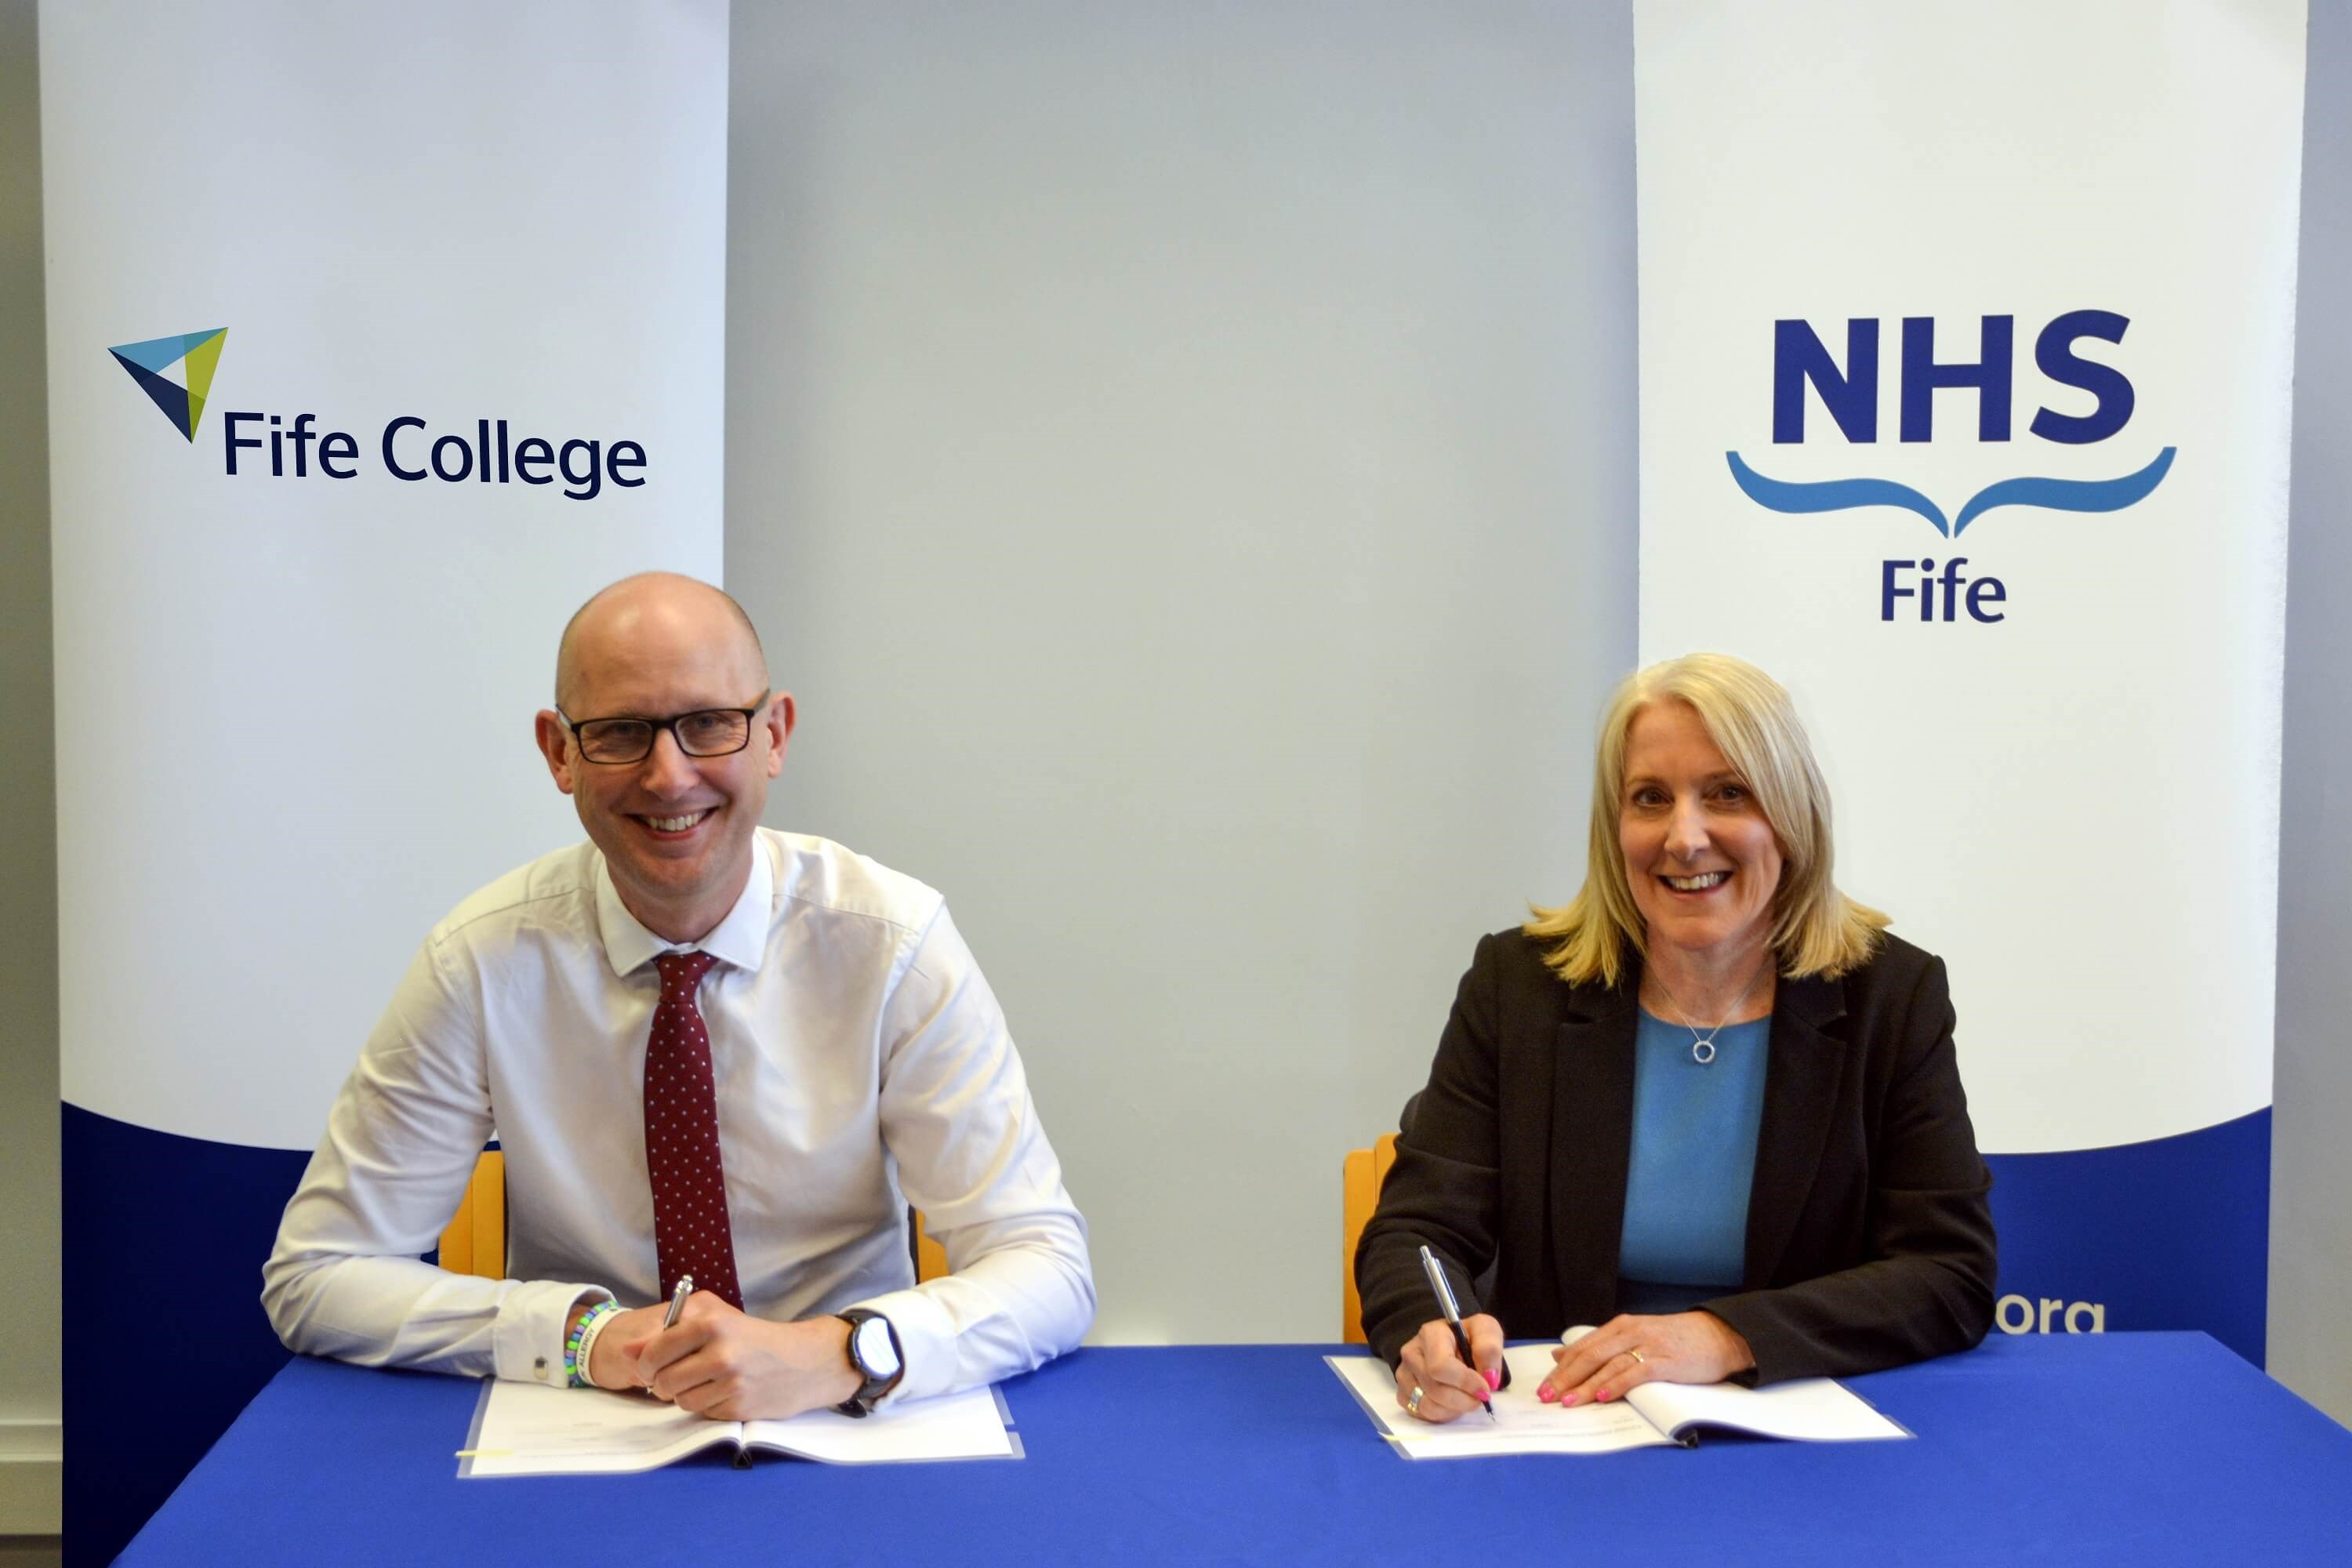 Fife College and NHS Fife agree new partnership to enable greater collaboration